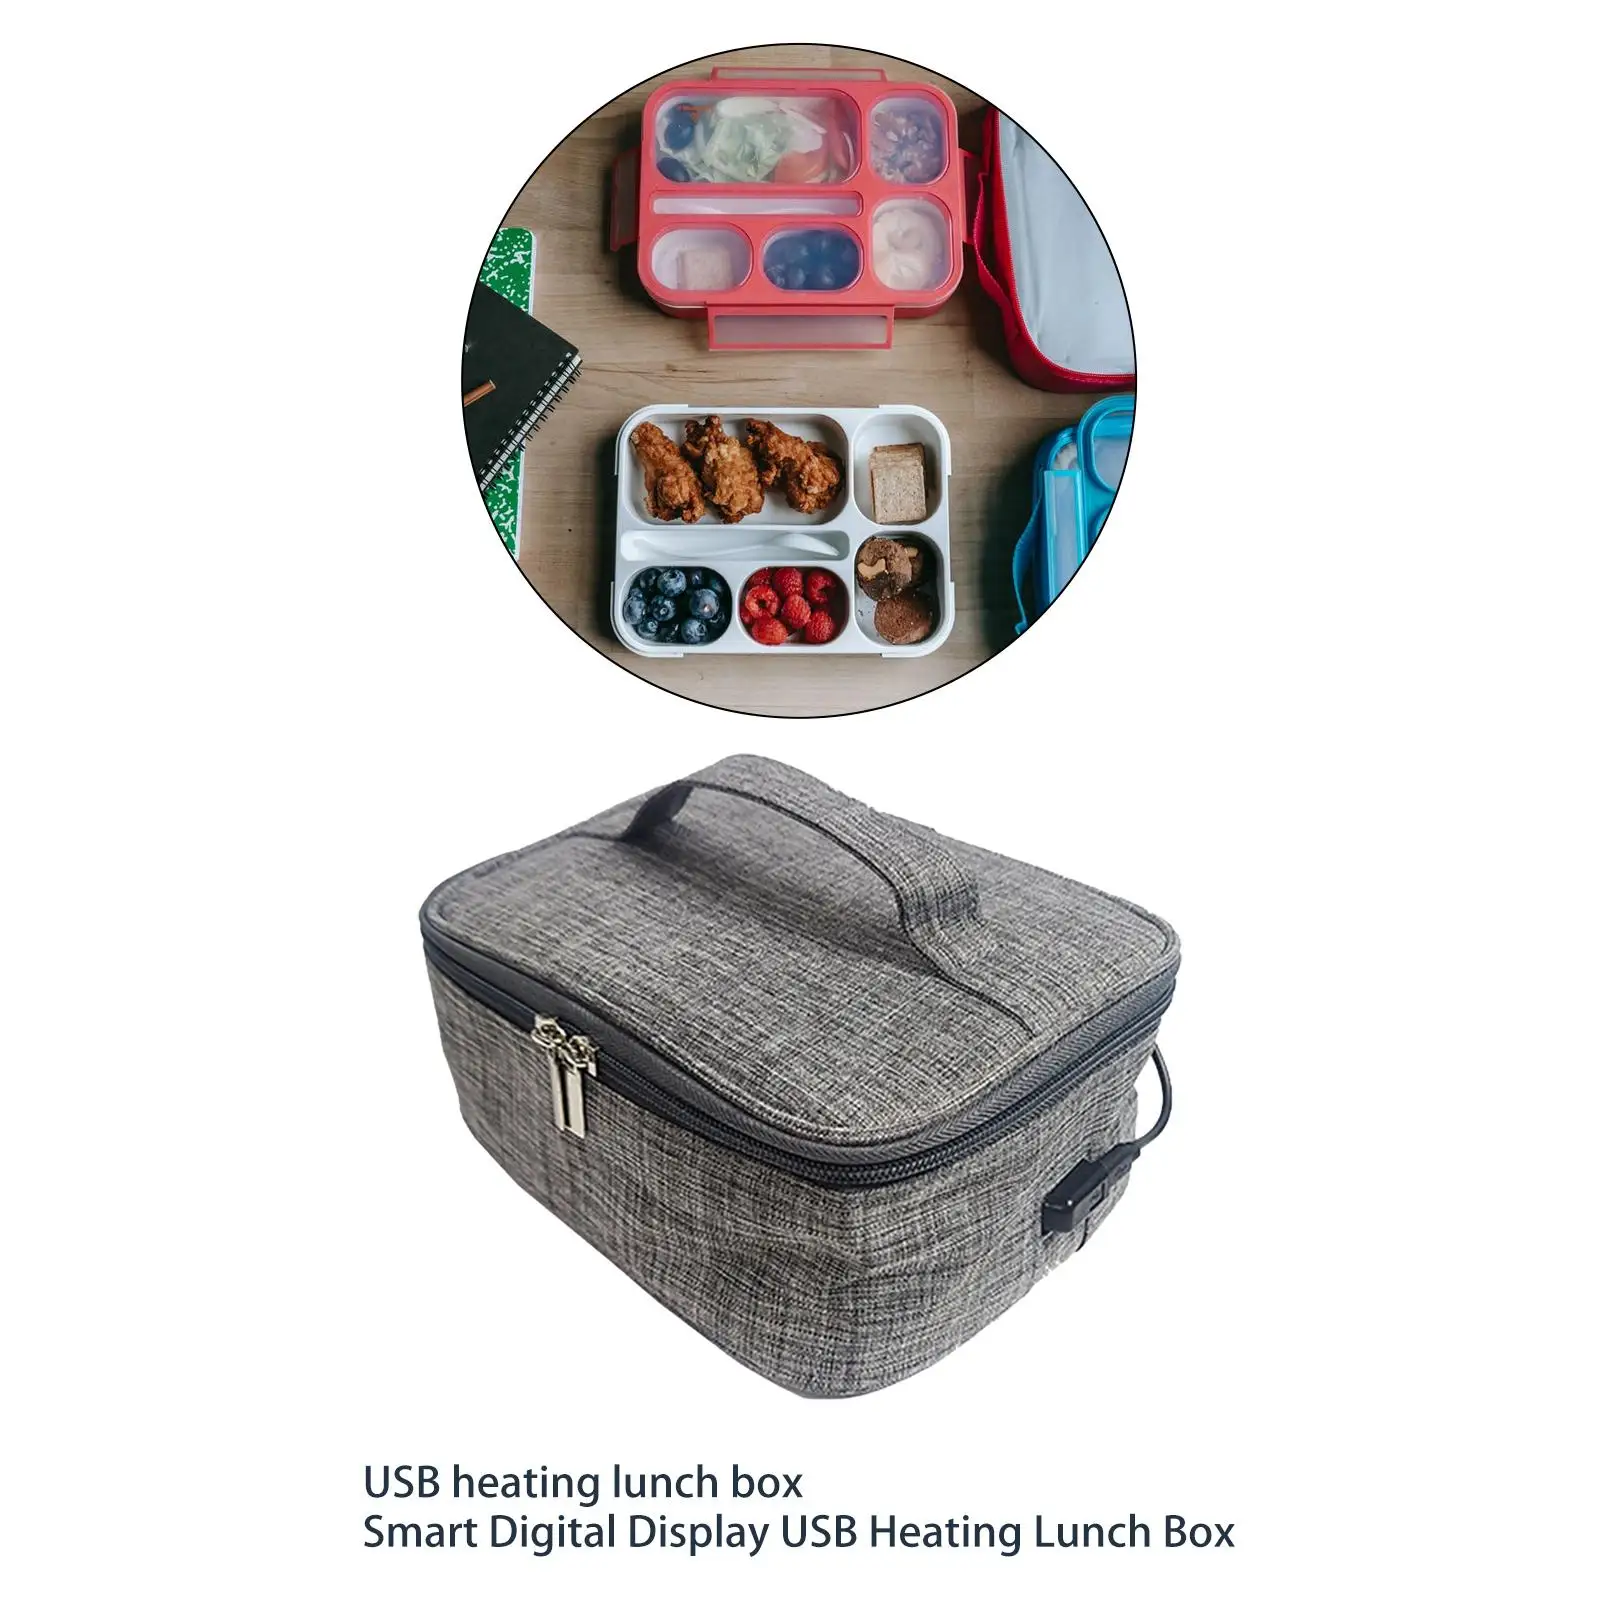 USB Heated Lunch Boxes Bag Container Oxford Cloth for Picnic Camping with Zipper ,Grey Convenient for Adults Reusable Durable